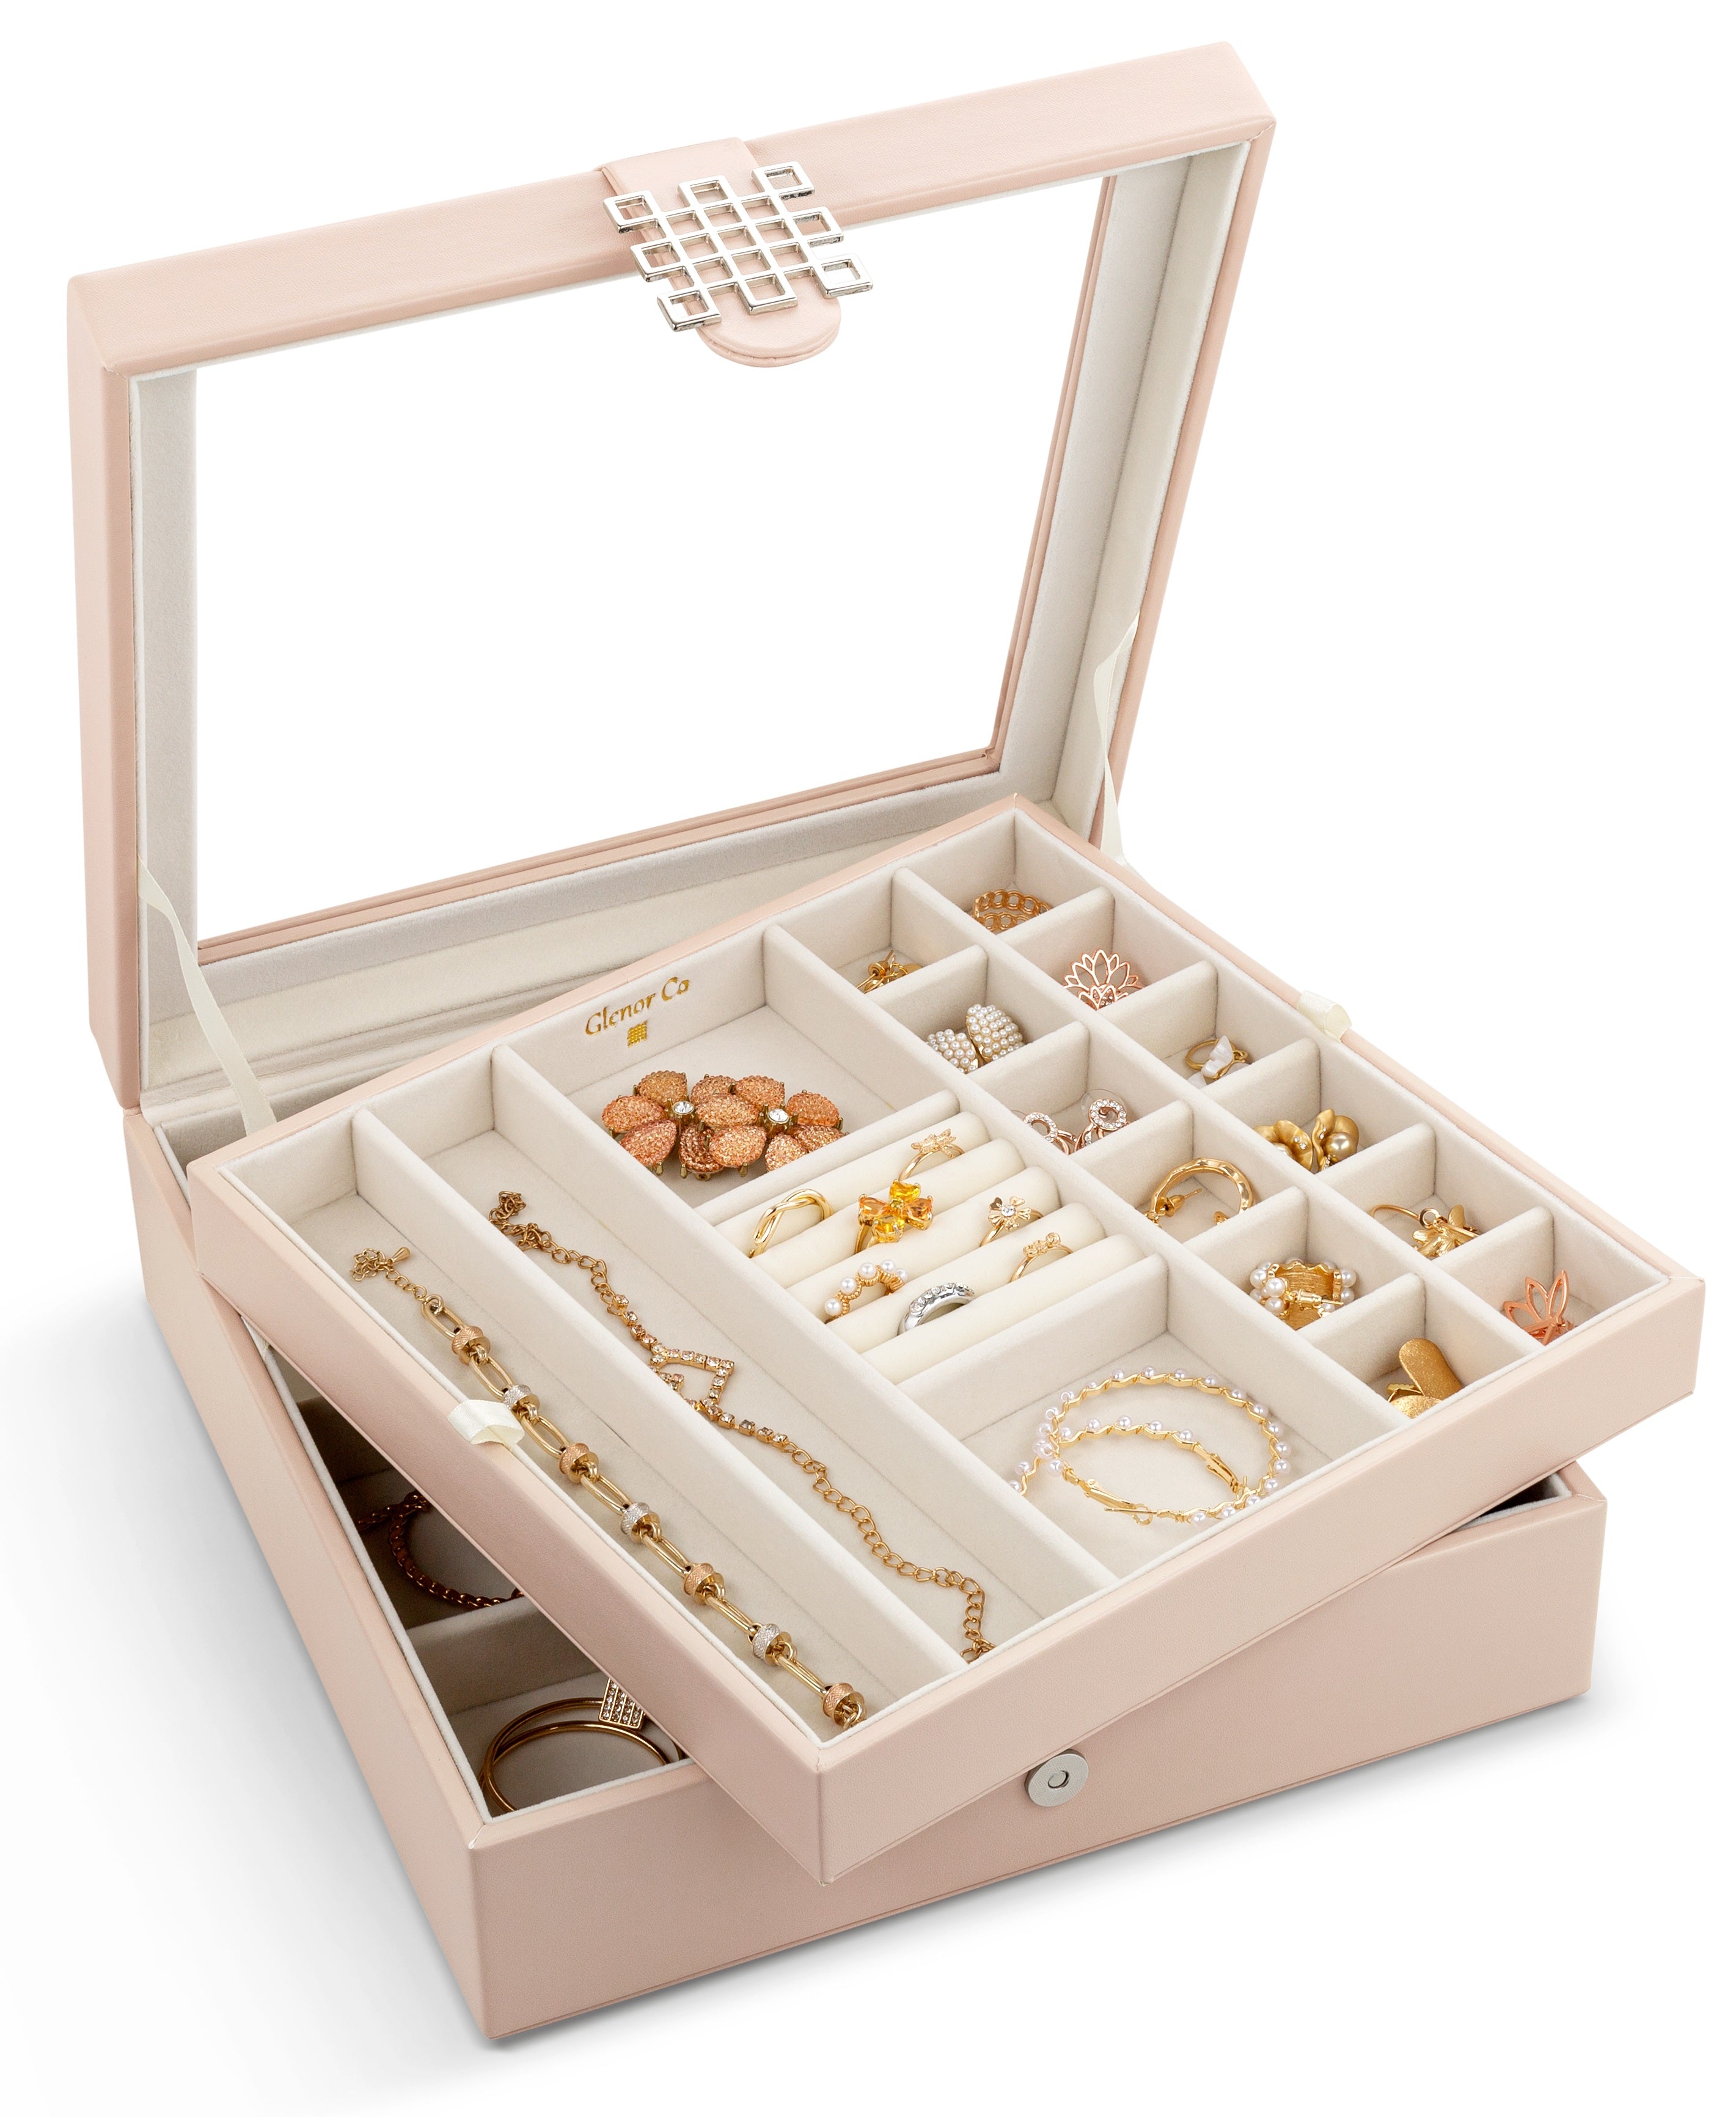 Glenor Co 28 Section Jewelry Box - 2 Layer - Buckle Snap Magnet Closure - Large